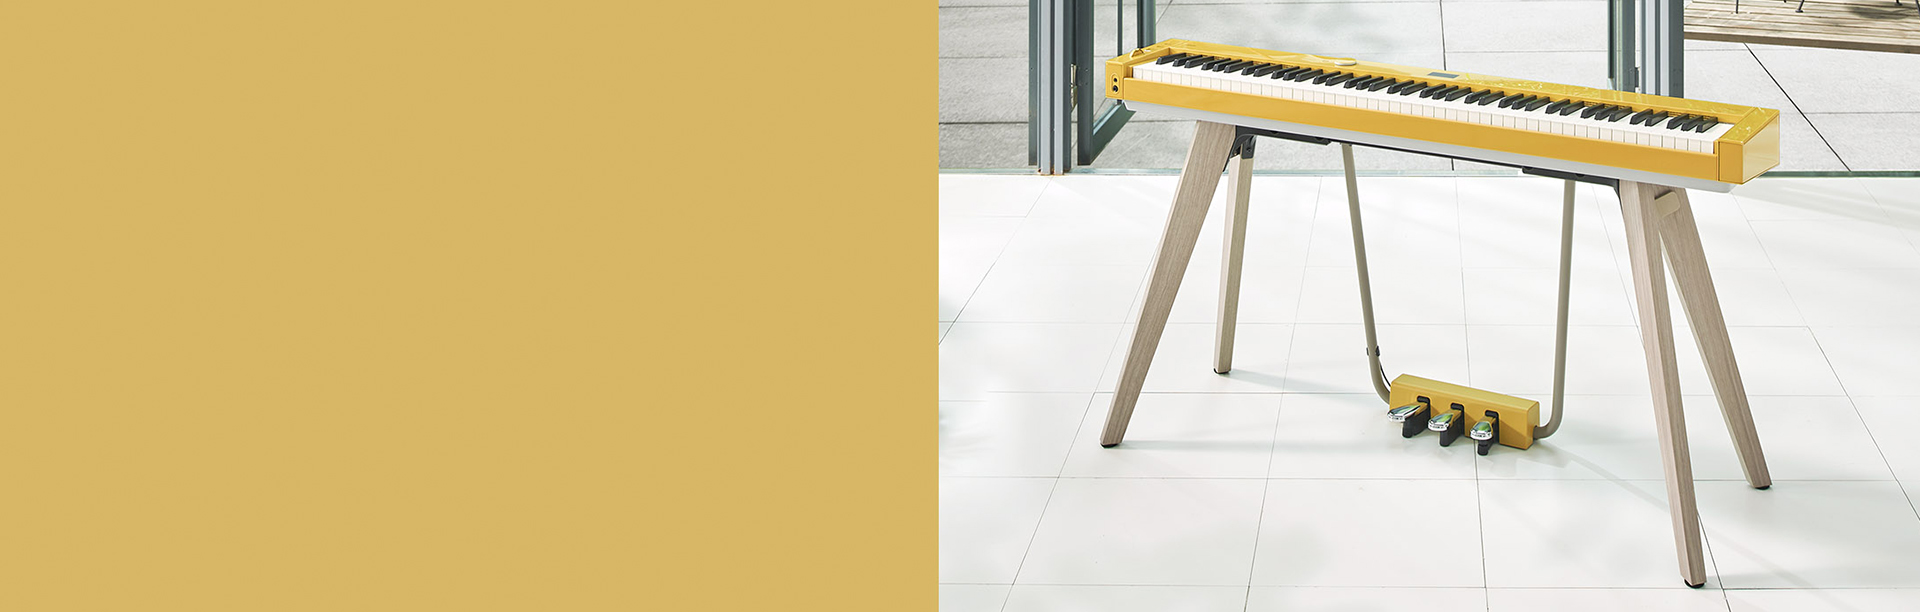 Yellow Privia PX-S7000 on keyboard stand